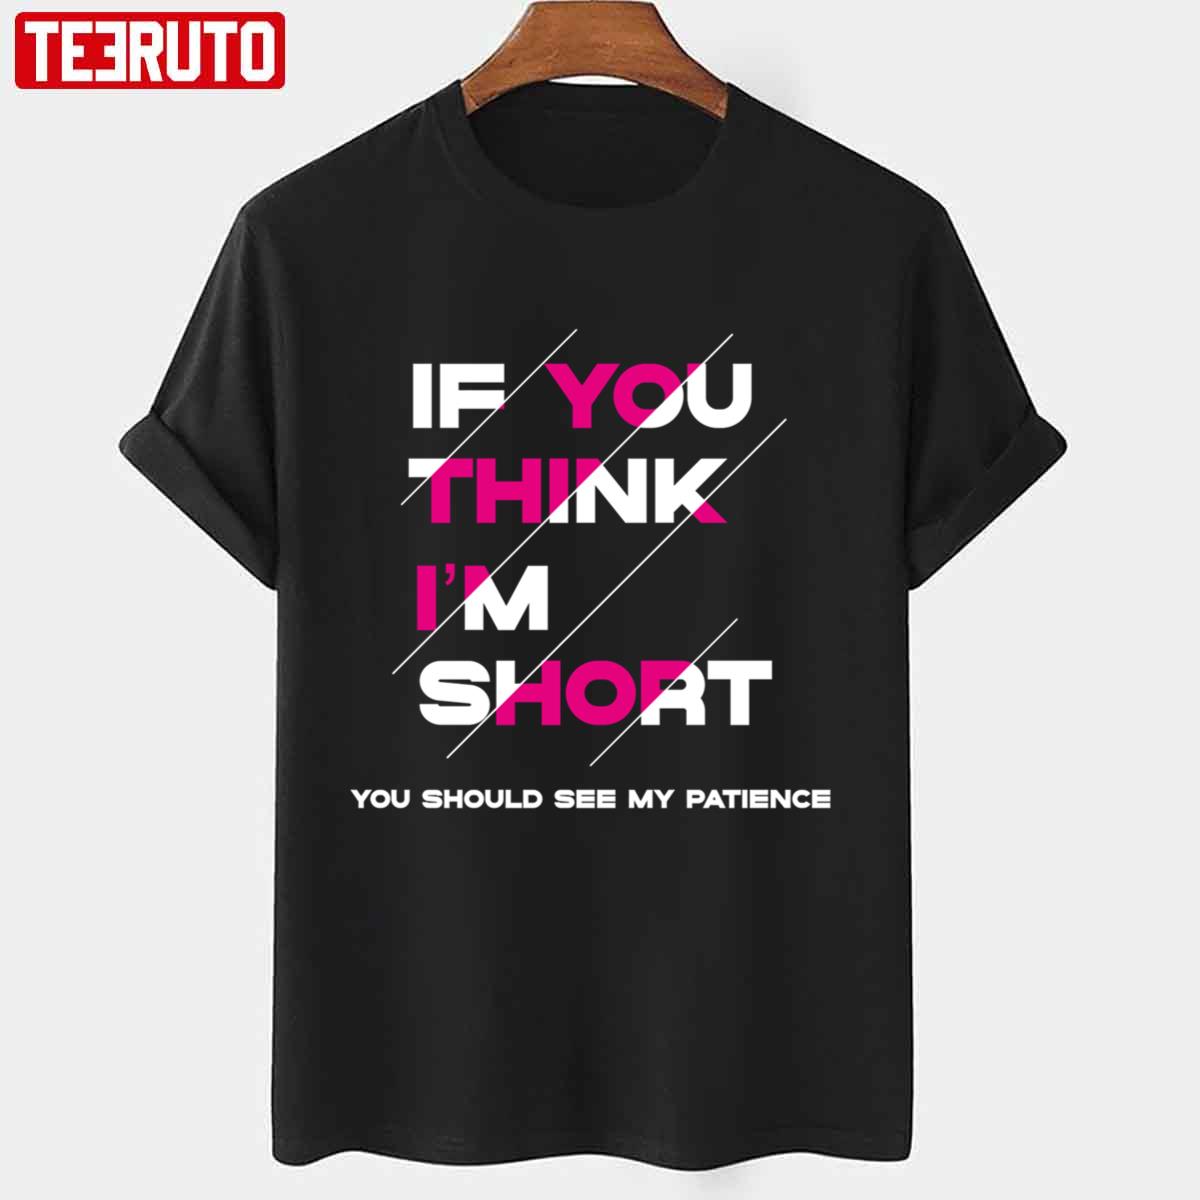 If You Think I’m Short You Should See My Patience Funny Quotes Unisex T-shirt